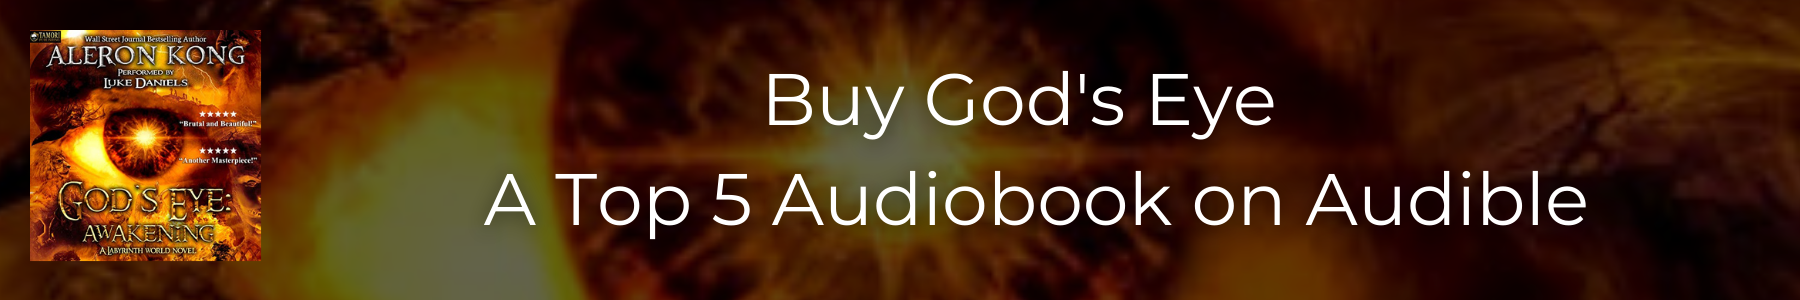 Copy of Copy of Copy of Buy a Top 5 Audiobook on Audible-2.png